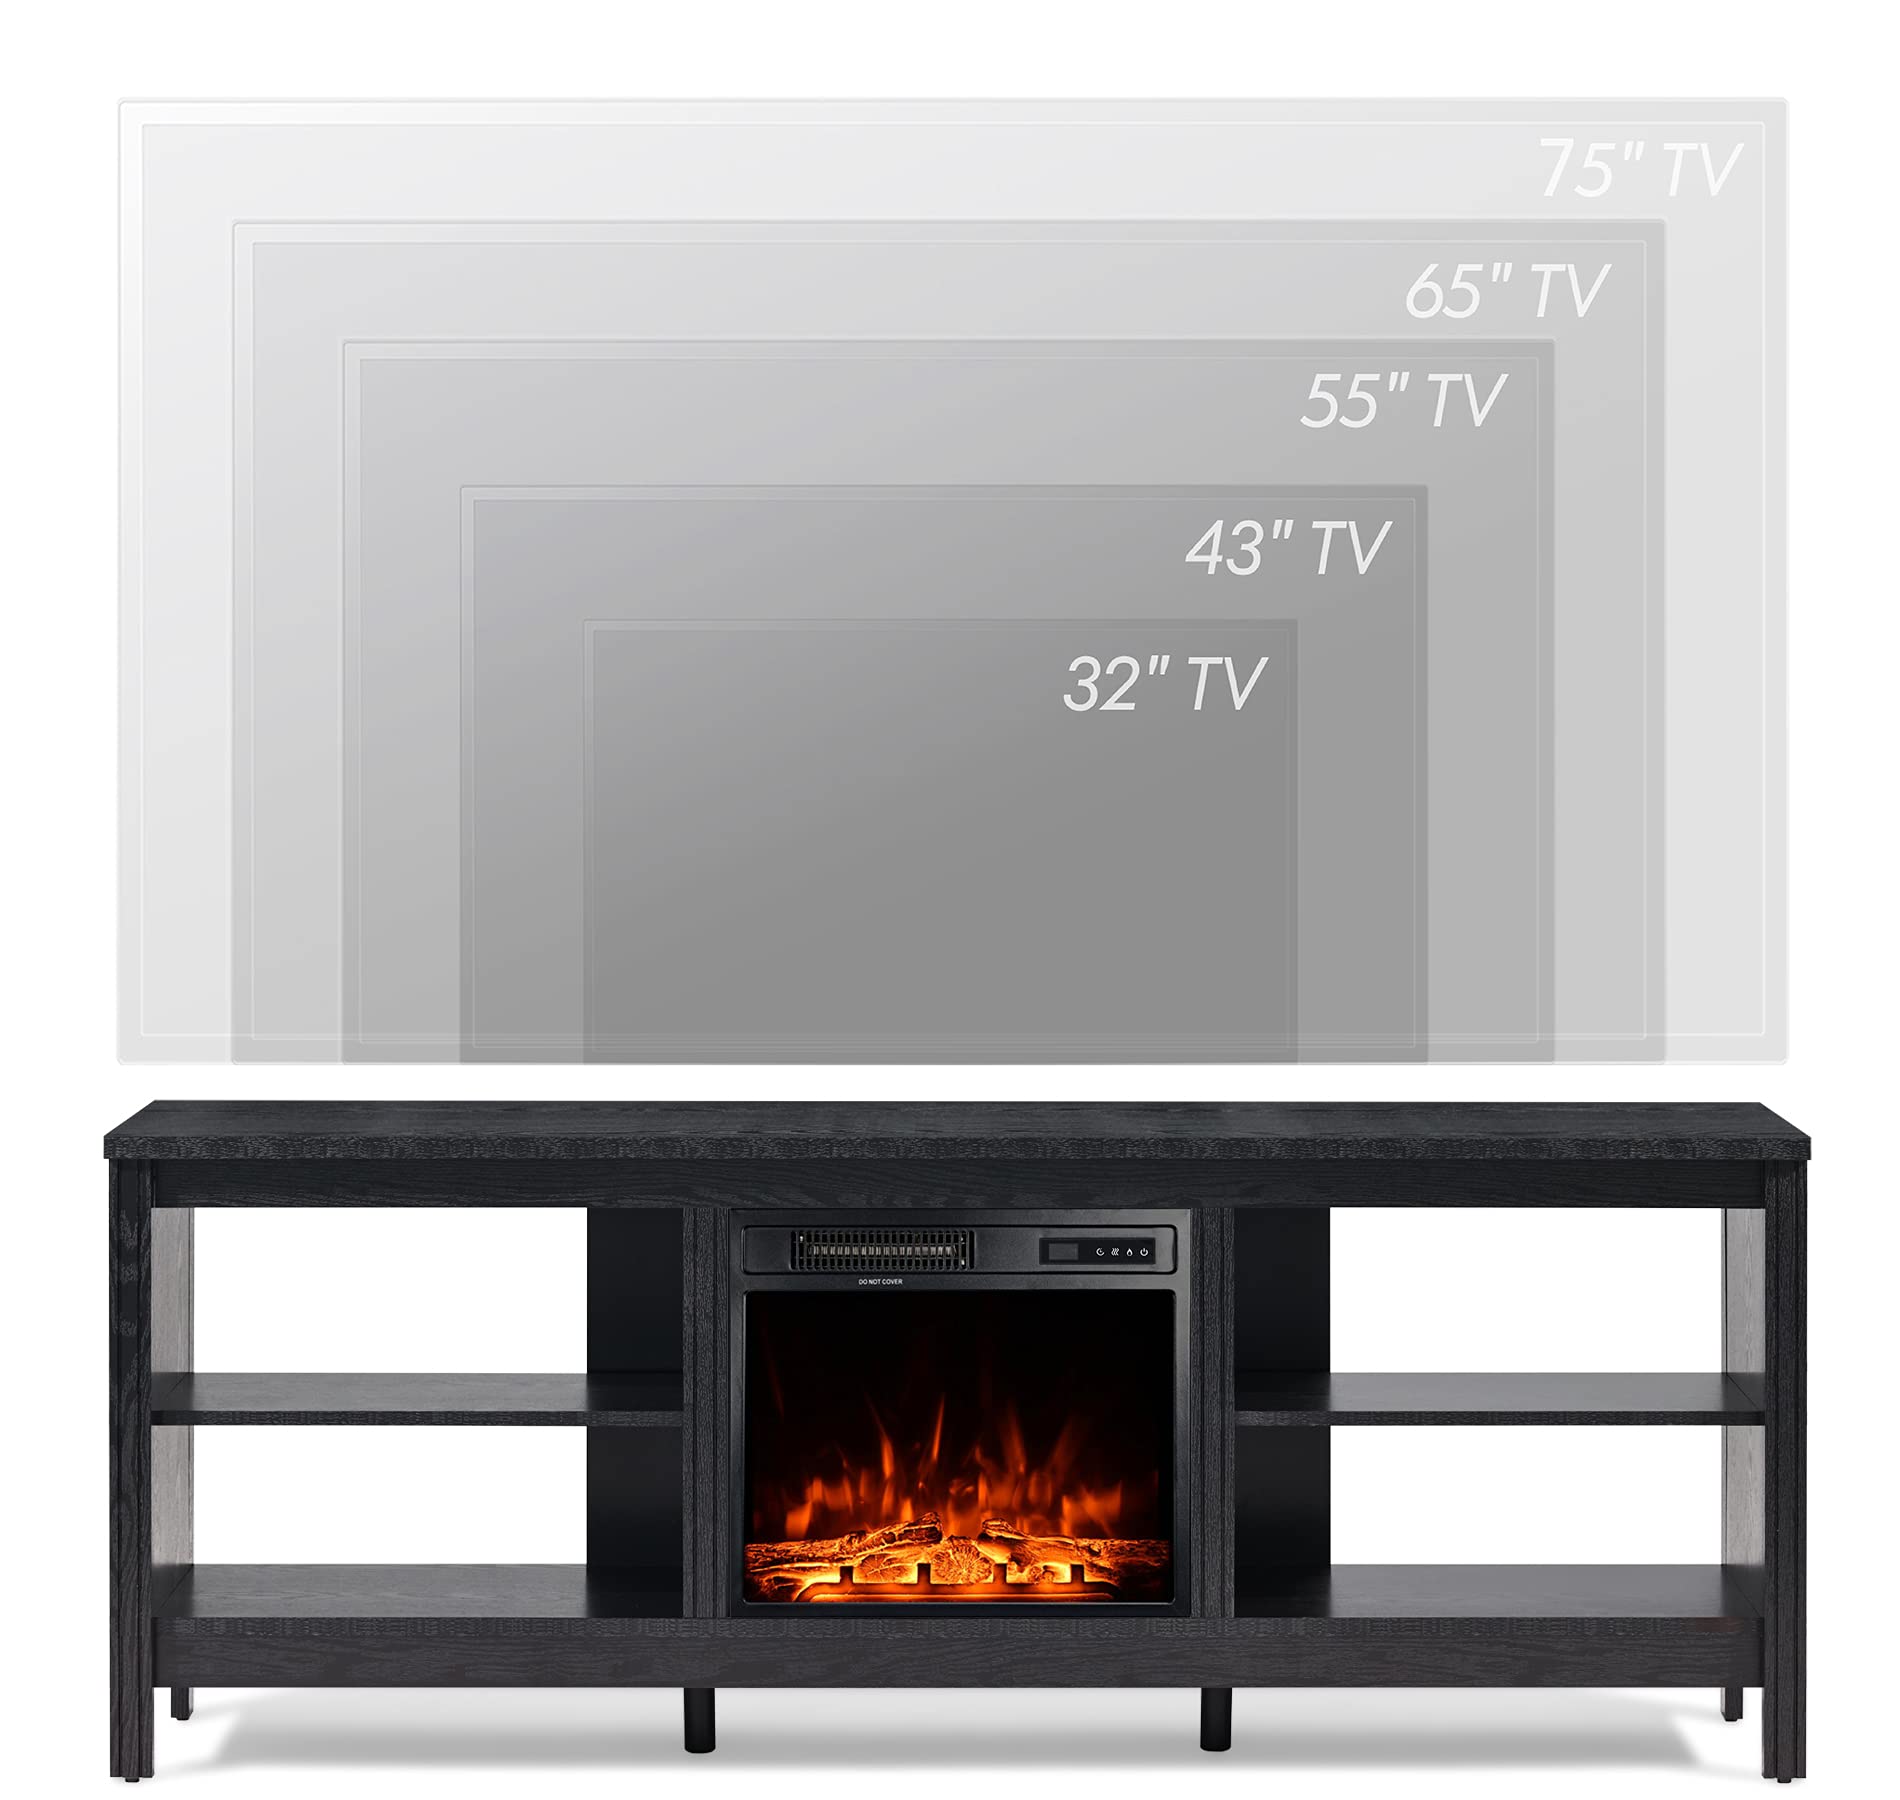 WAMPAT Fireplace TV Stand for TVs Up to 75 Inch with RBG LED Light, Farmhouse Wood Electric Fireplace Entertainment Center with 4 Storages for Living Room Bedroom, Black